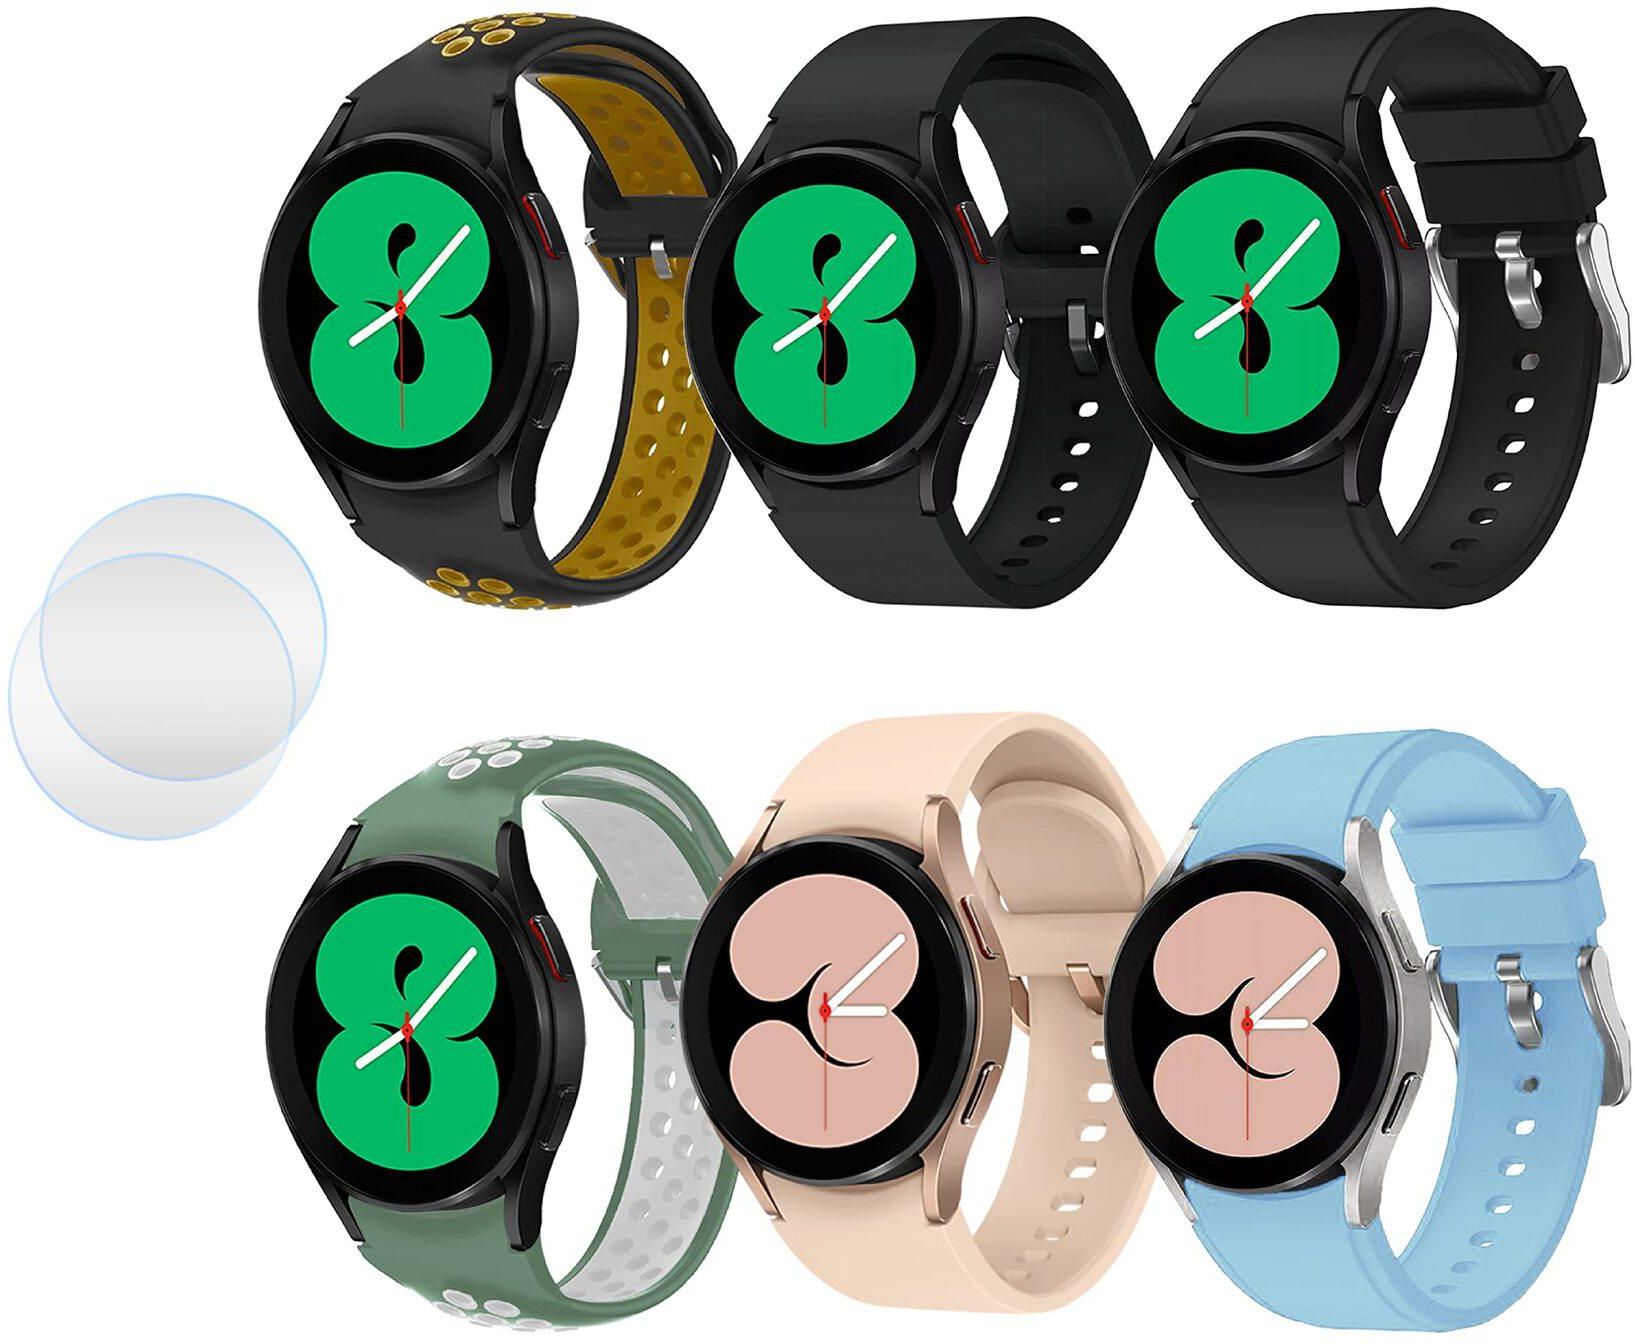 Moxedo Optimum Bundle Pack of 8, Multi-Color Silicone Replacement Strap Band with 40mm Screen Protector Compatible For Samsung Galaxy Watch 4 (C2)